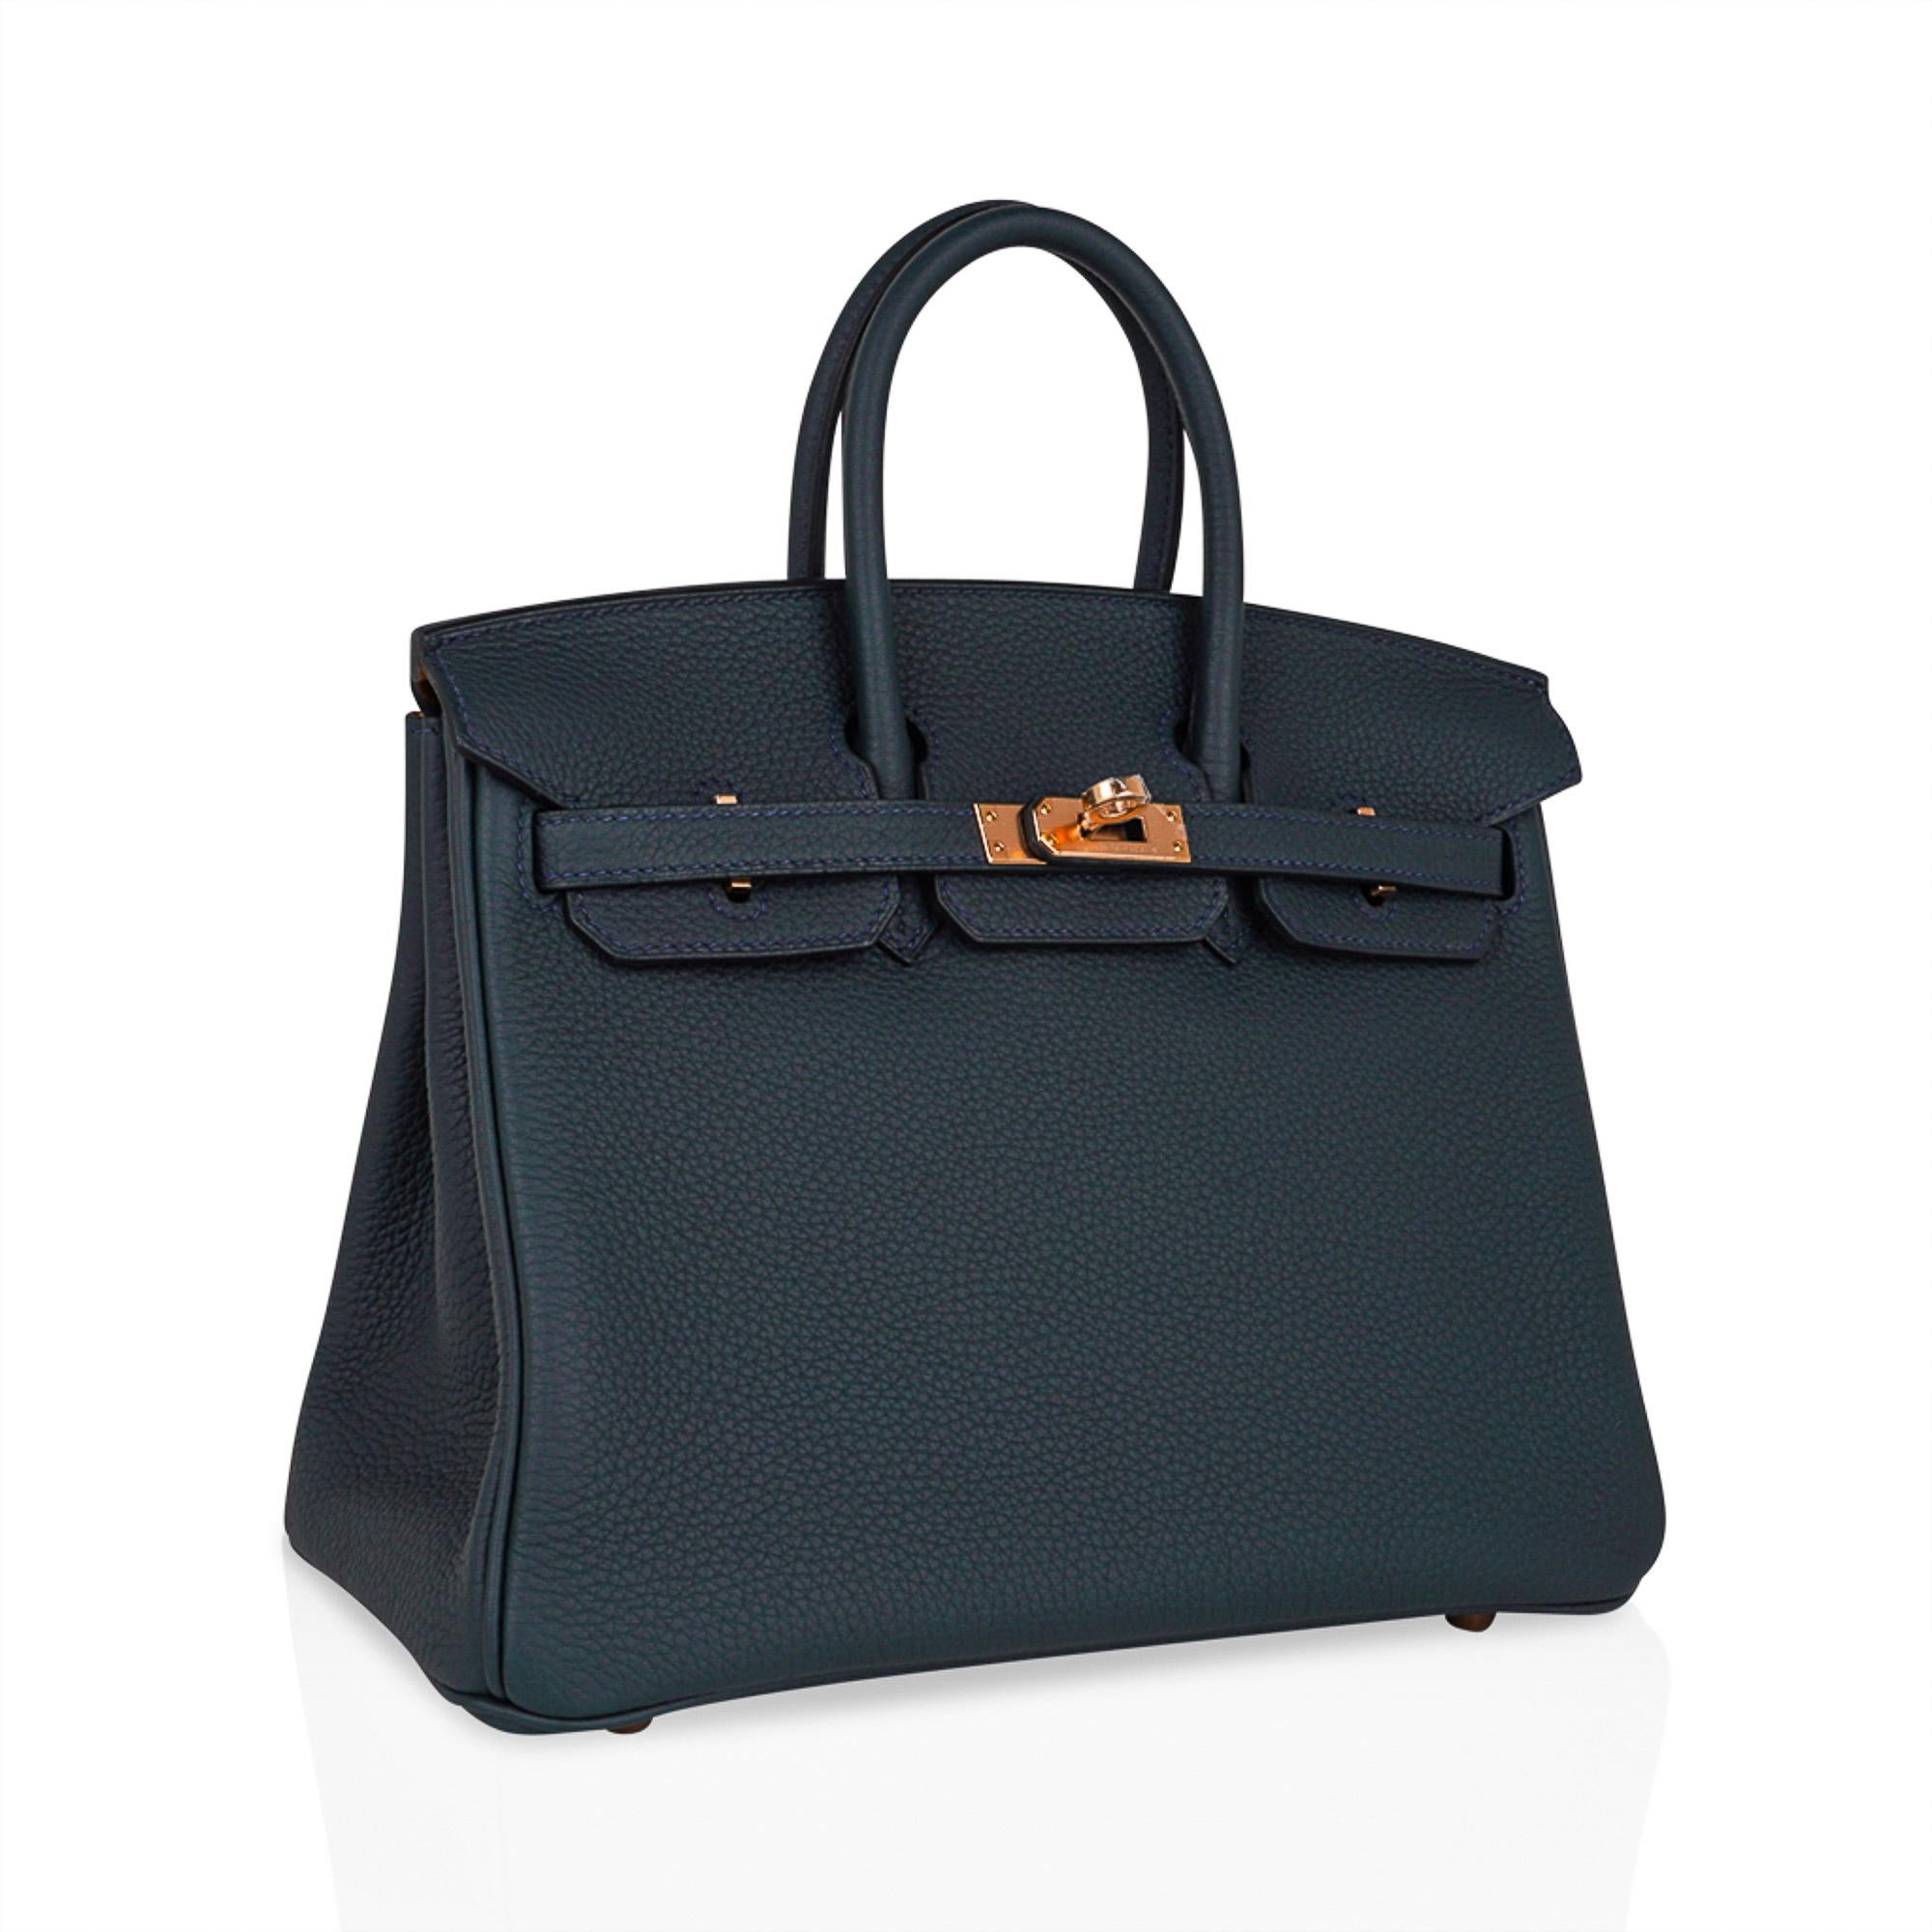 Mightychic offers an Hermes Birkin HSS 25 bag featured in Vert Cypress with Gold interior.
This rich deep green Special Order Hermes Birkin bag is accentuated with lush Rose Gold hardware.
Togo leather is supple and soft to the touch and scratch